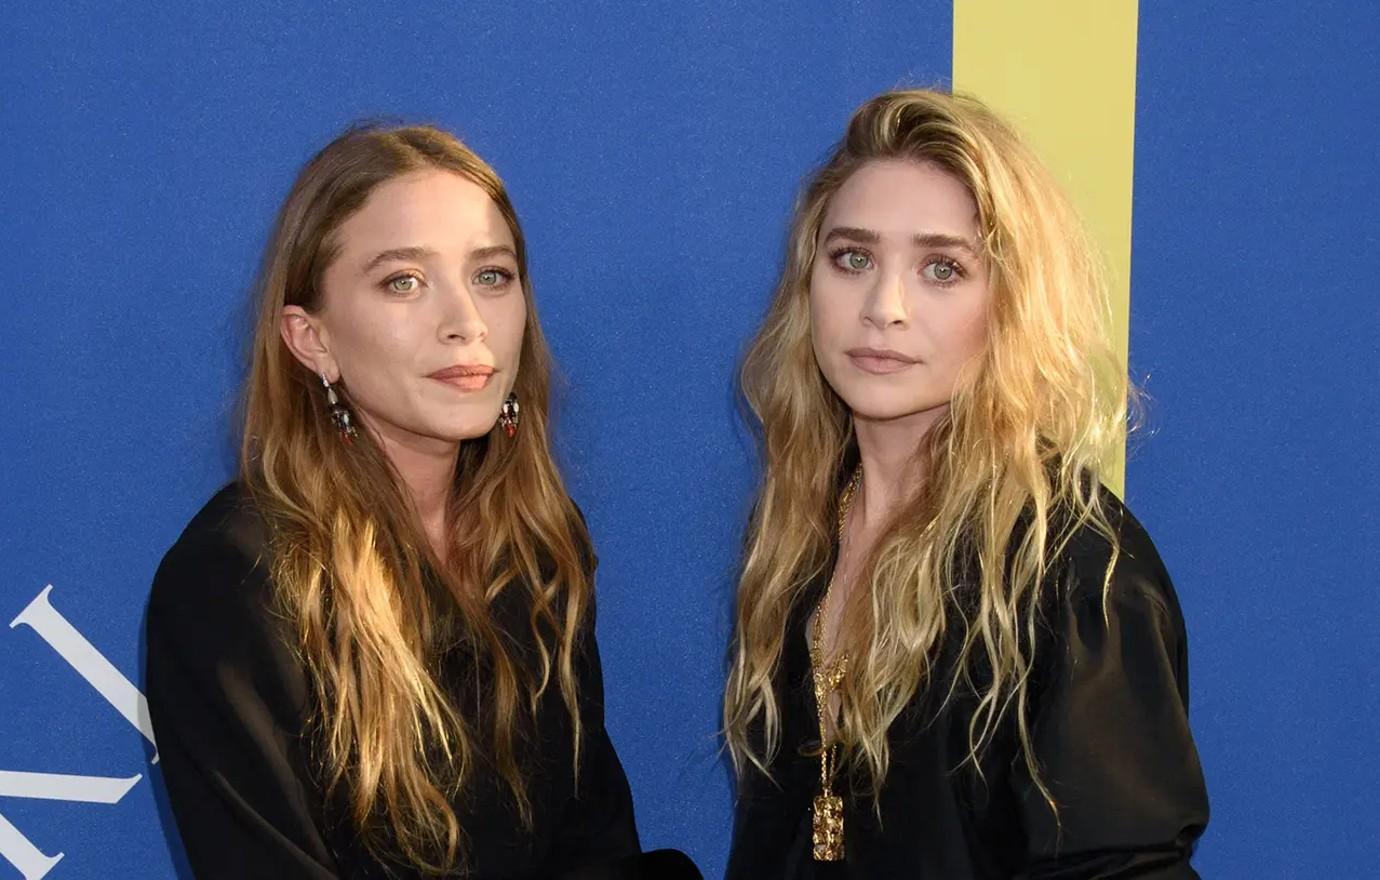 Ashley Olsen Spotted In NYC After Birth Caused Tension With Mary-Kate